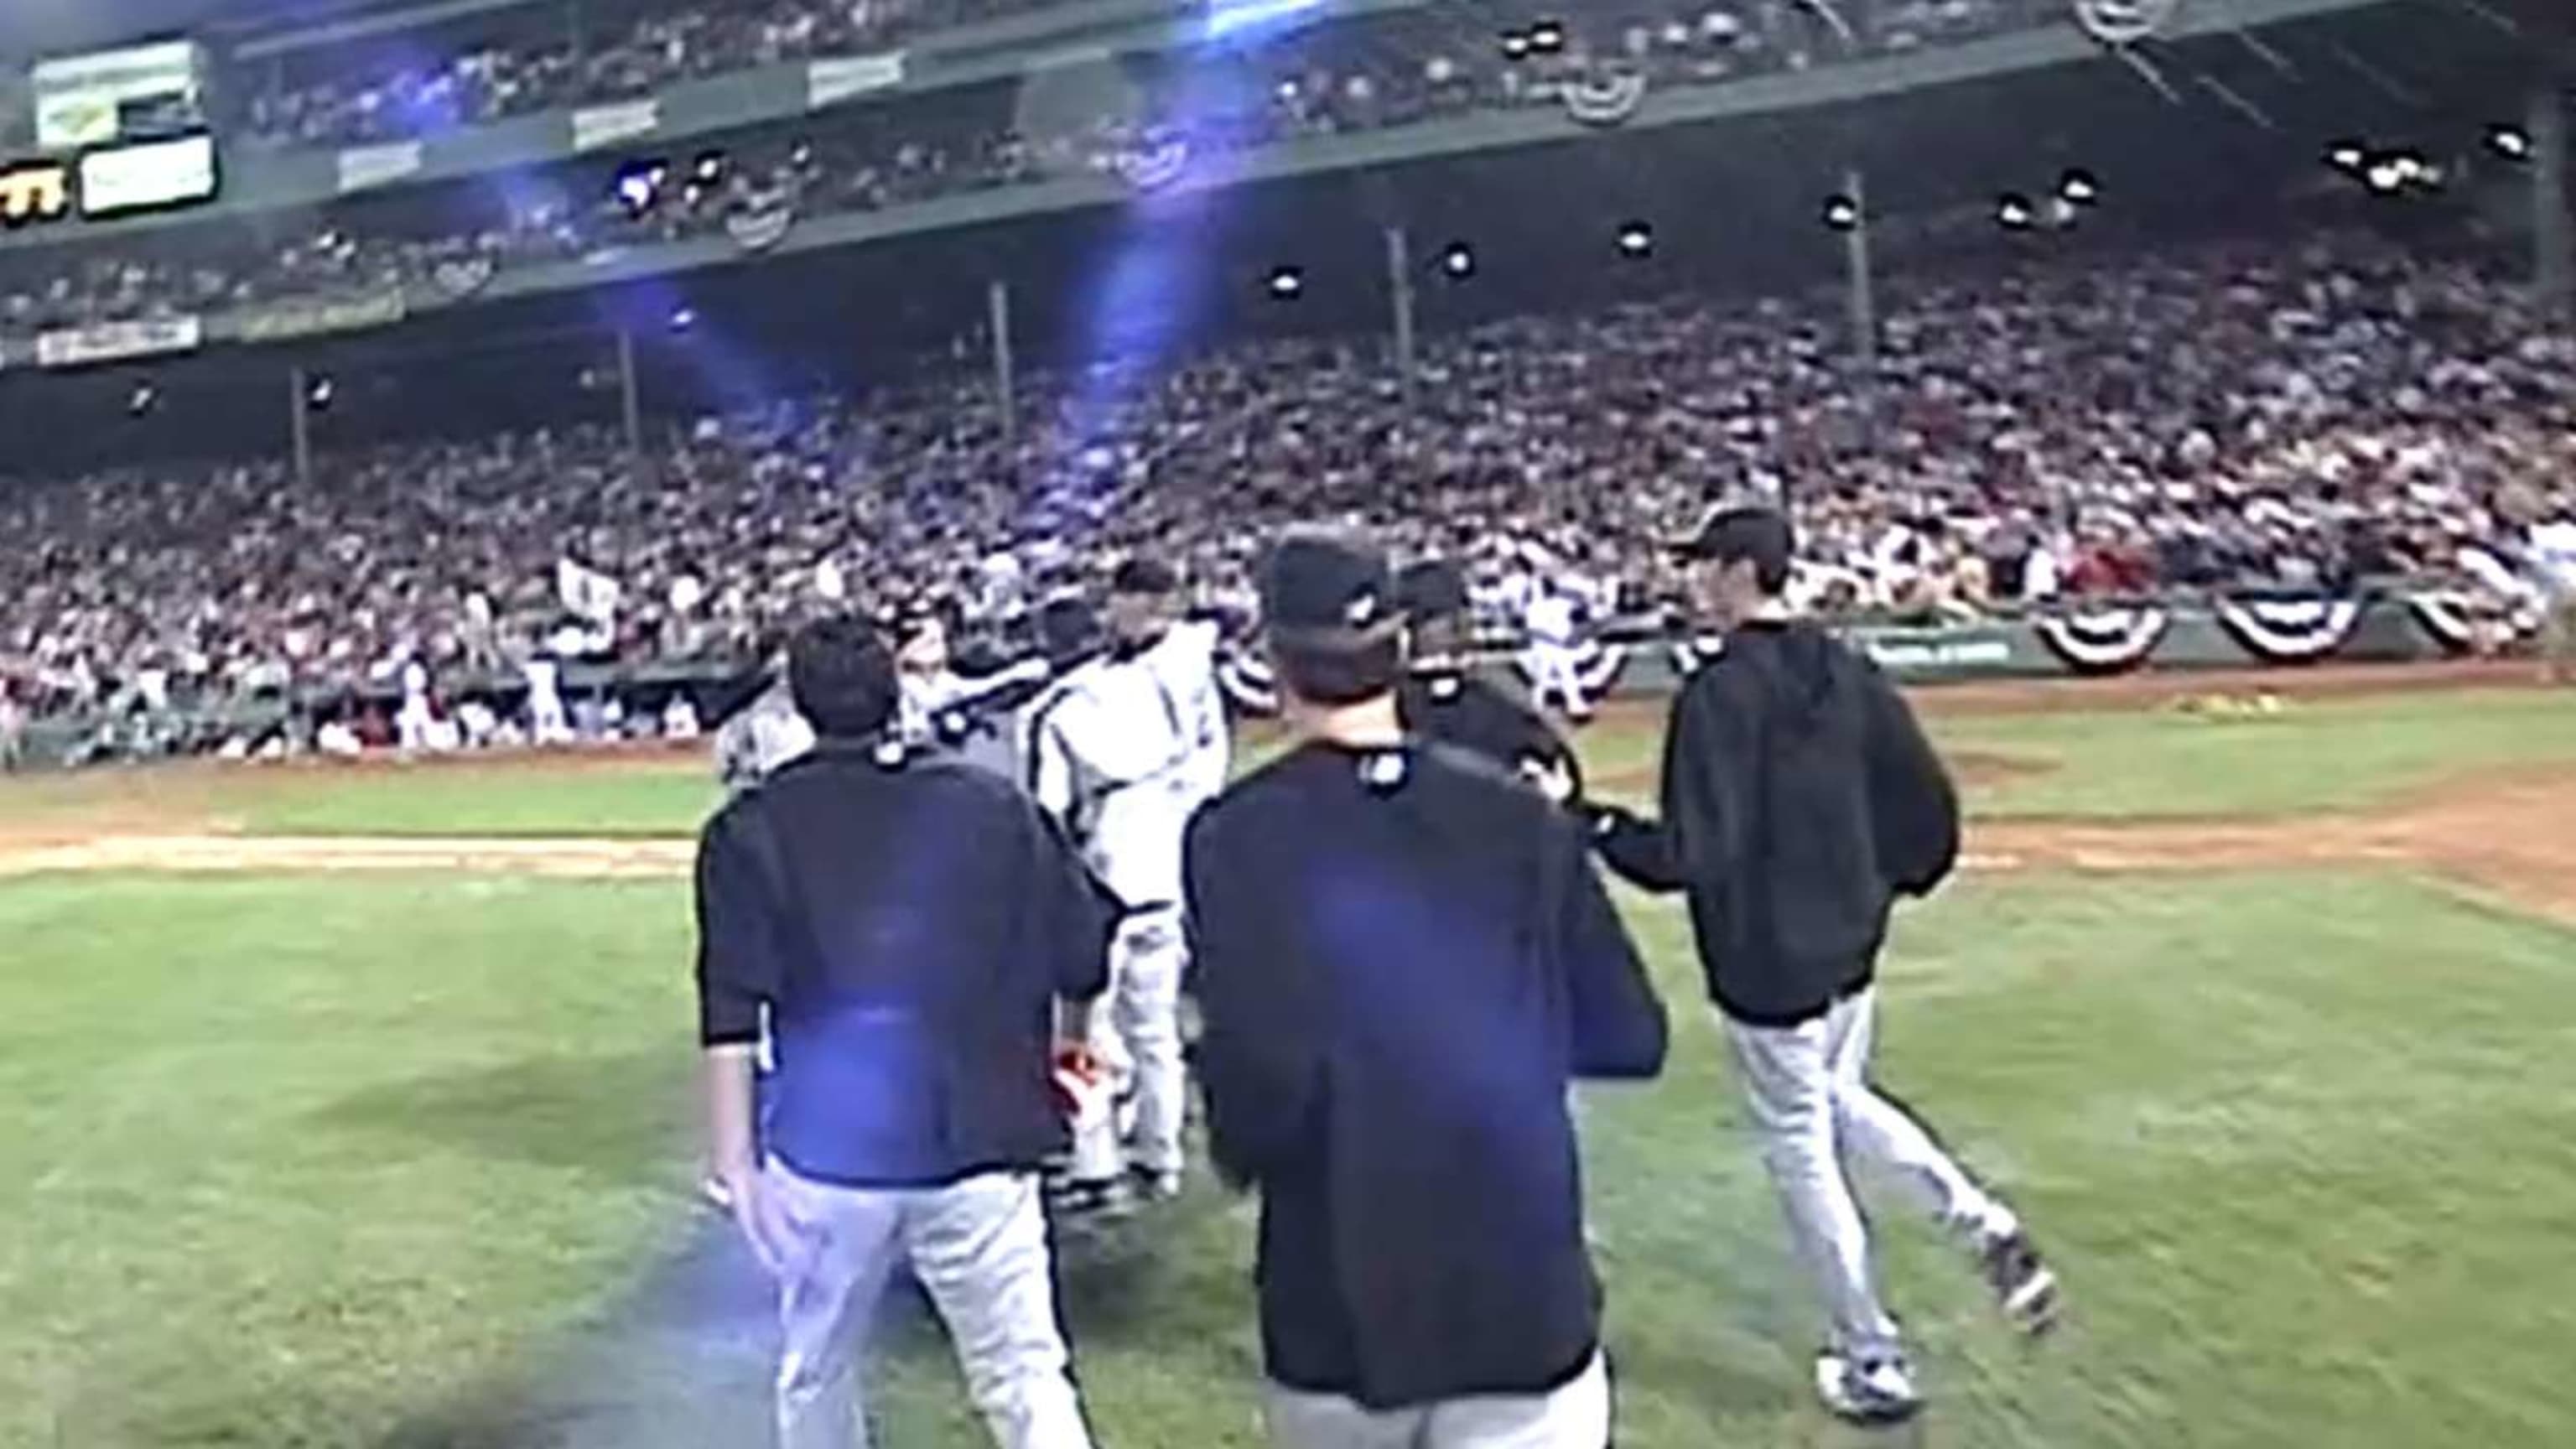 Believe It: The Story of the Chicago White Sox 2005 World Series Champions